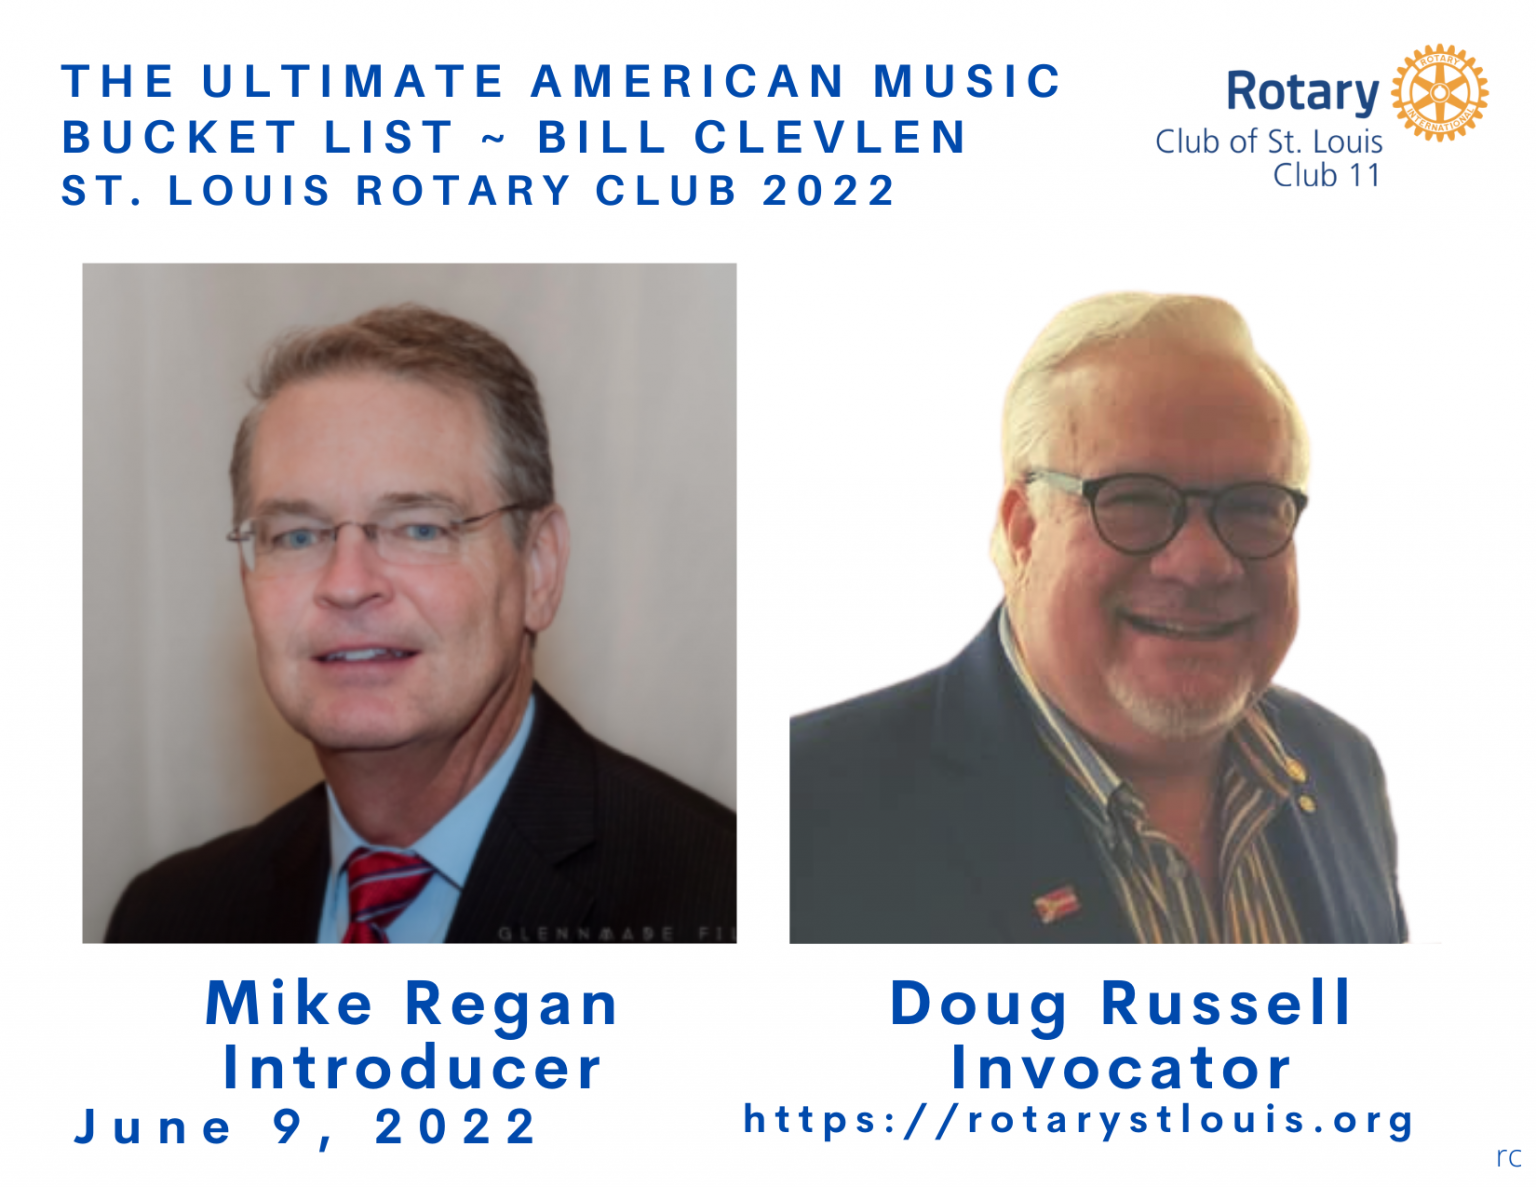 Mike Regan, Introducer & Doug Russell, Invocator 6-9-22 St. Louis Rotary